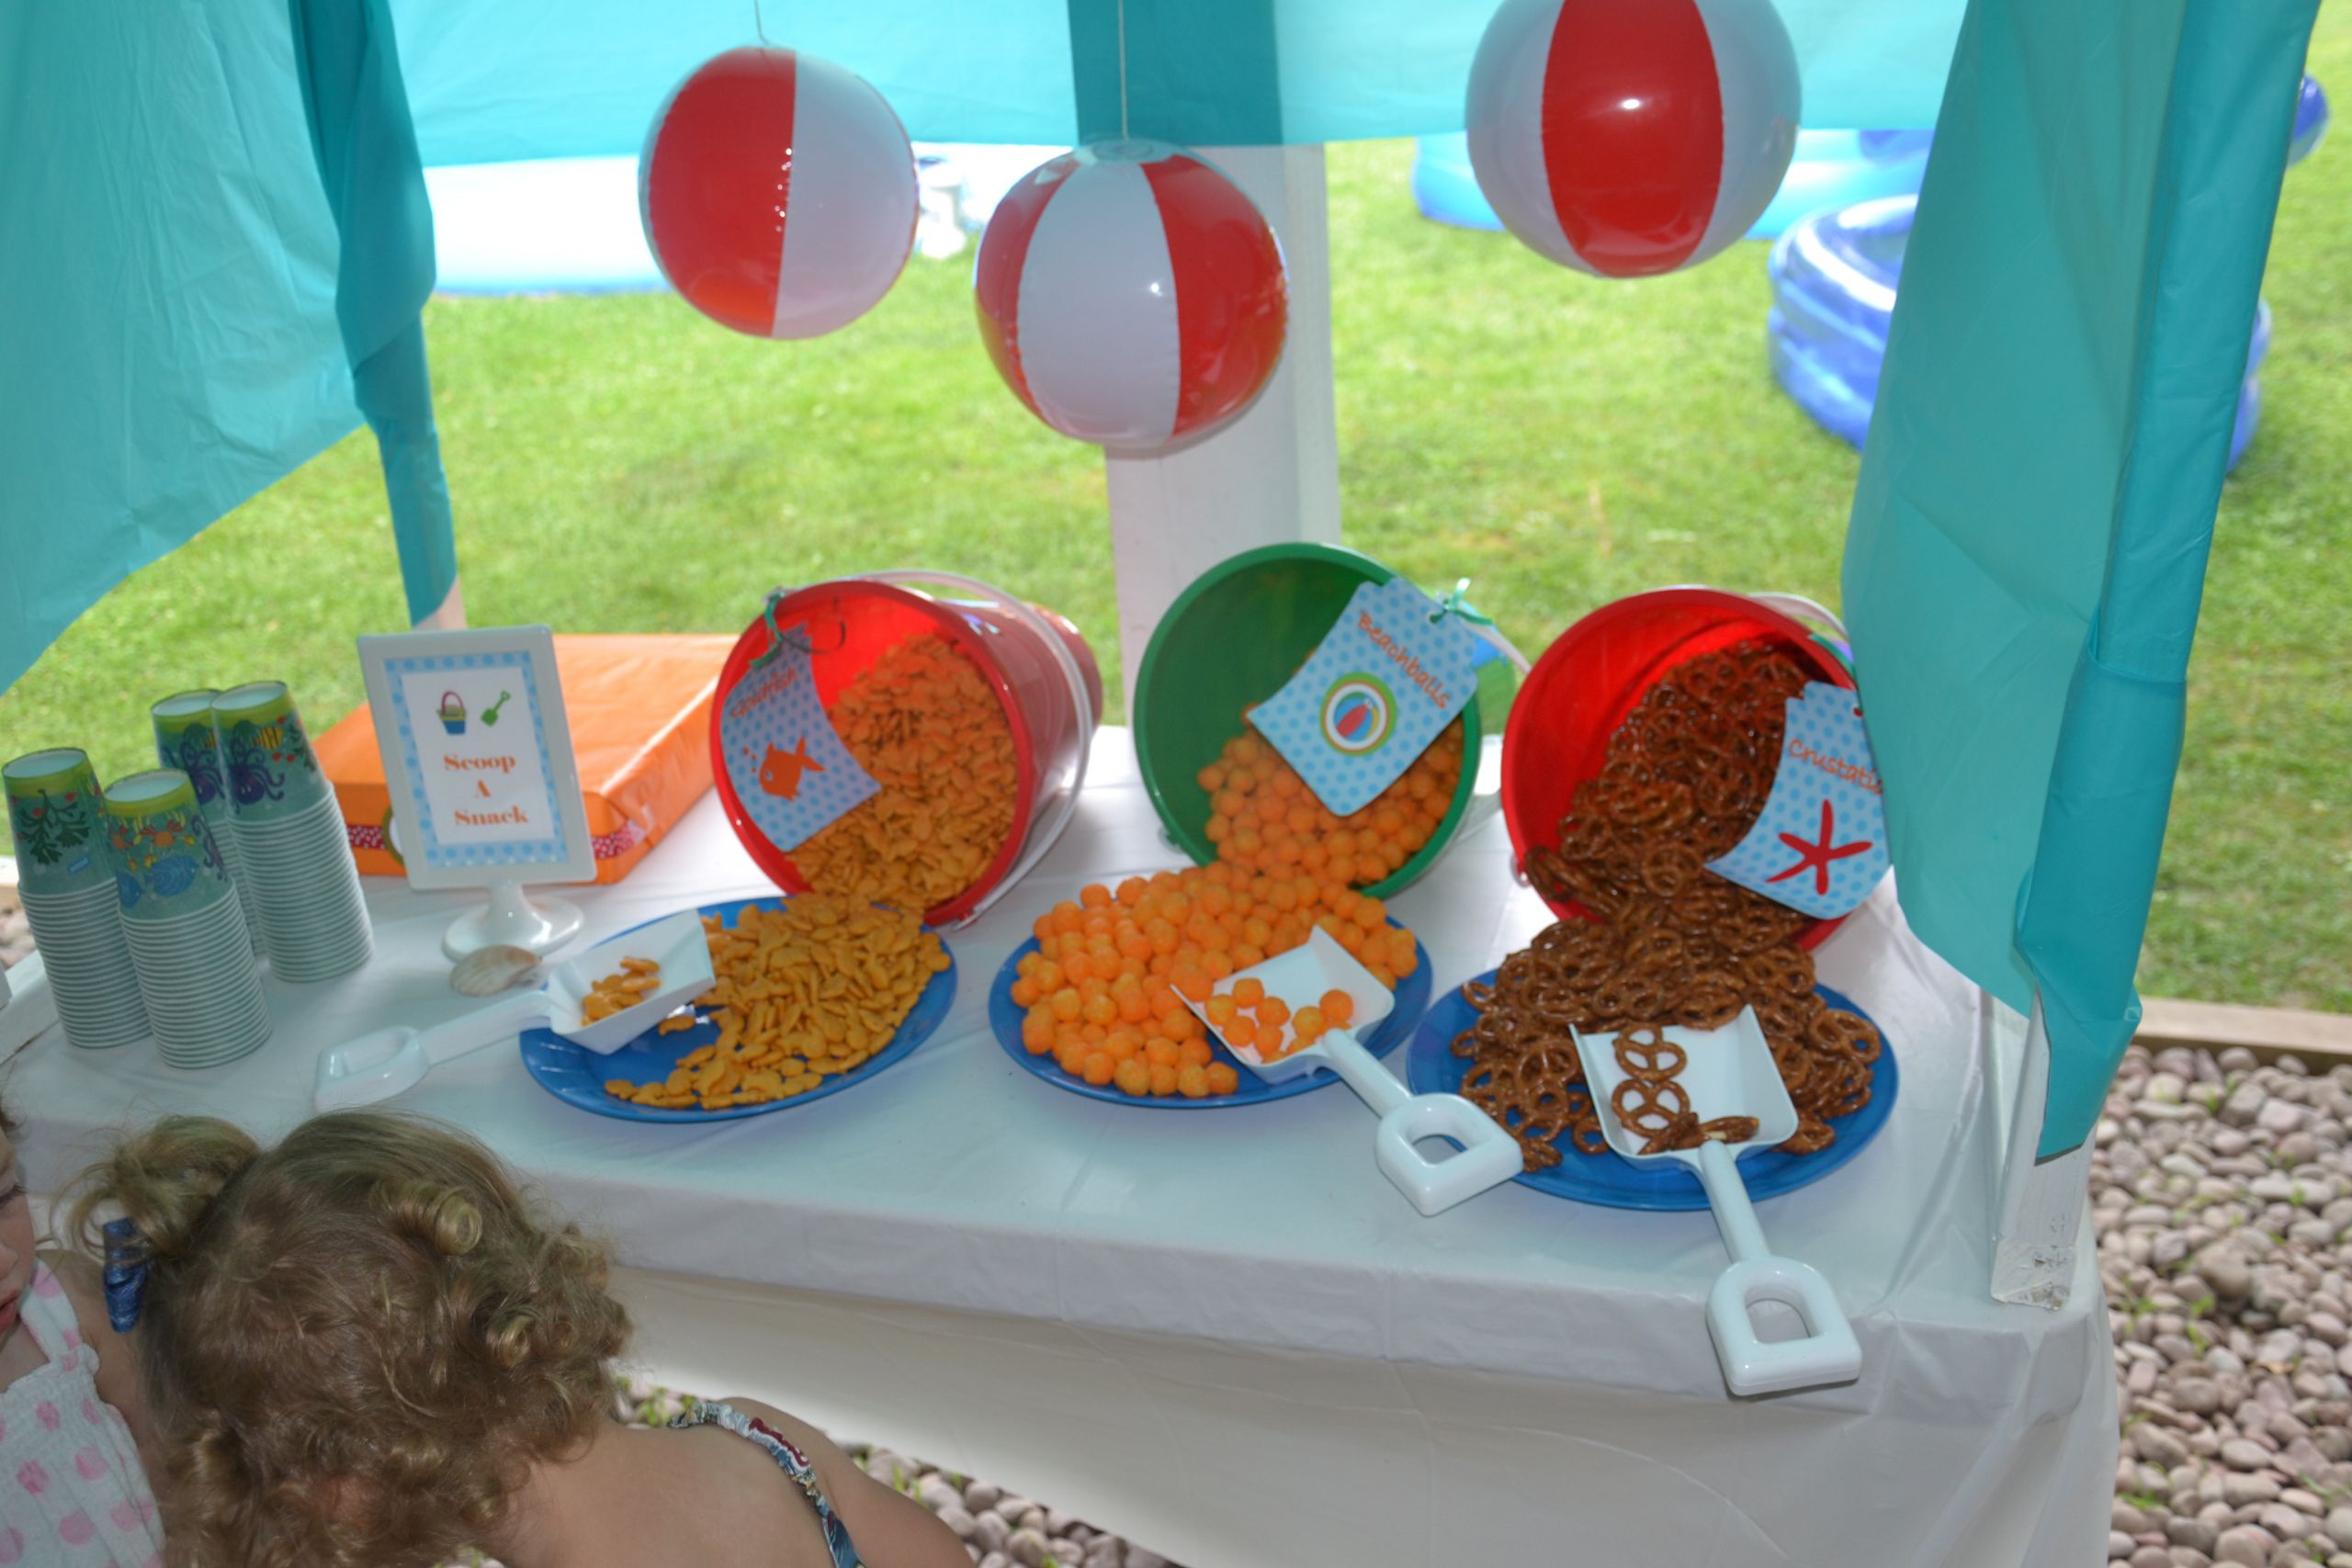 Pool Party Ideas For Kids
 Party on a Bud  Ideas for Serving Summer Snacks